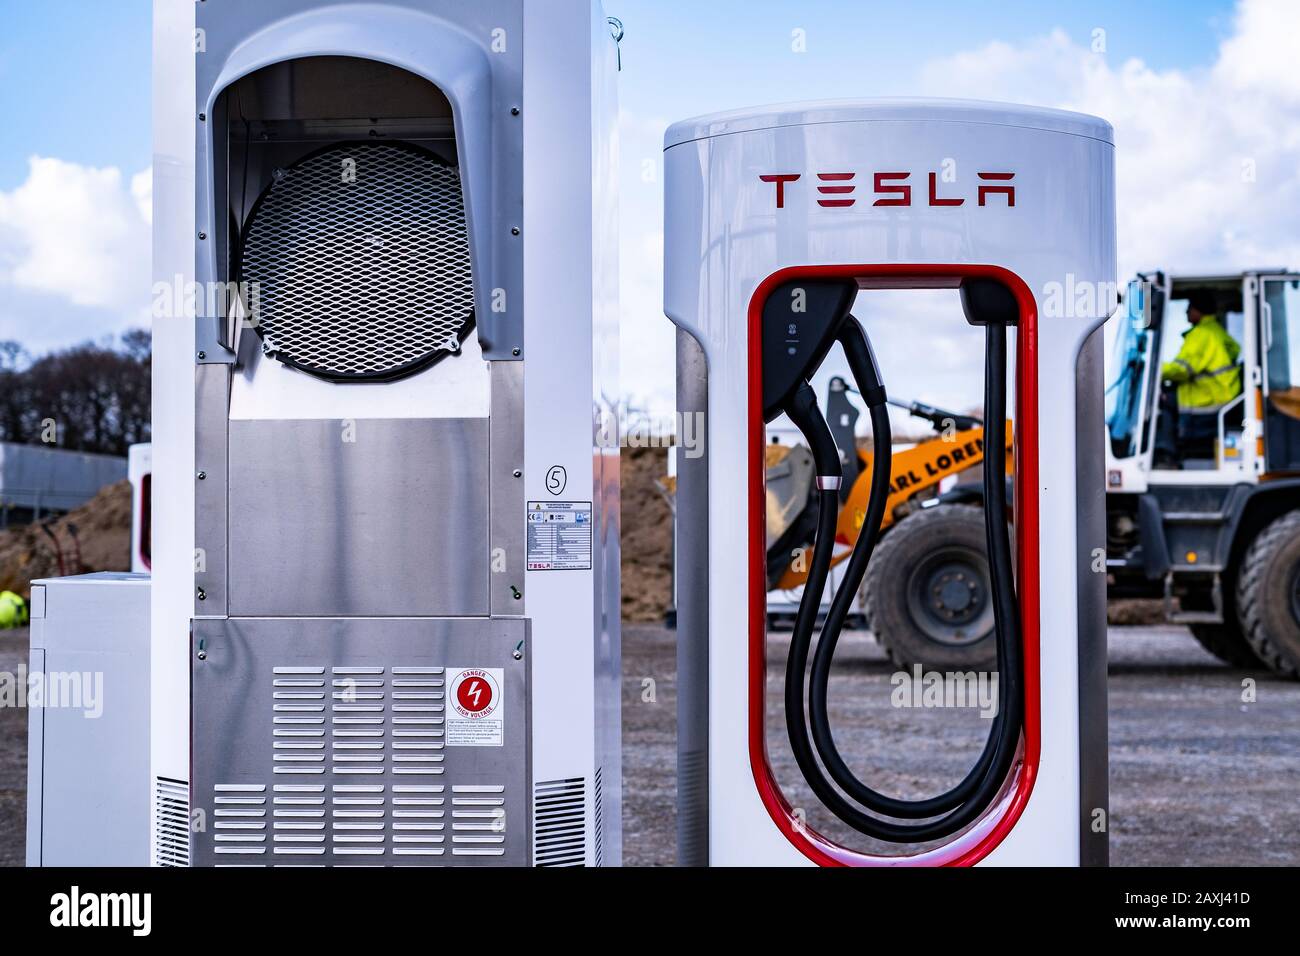 Tesla super charger station in building status. Hilden, Germany. Stock Photo